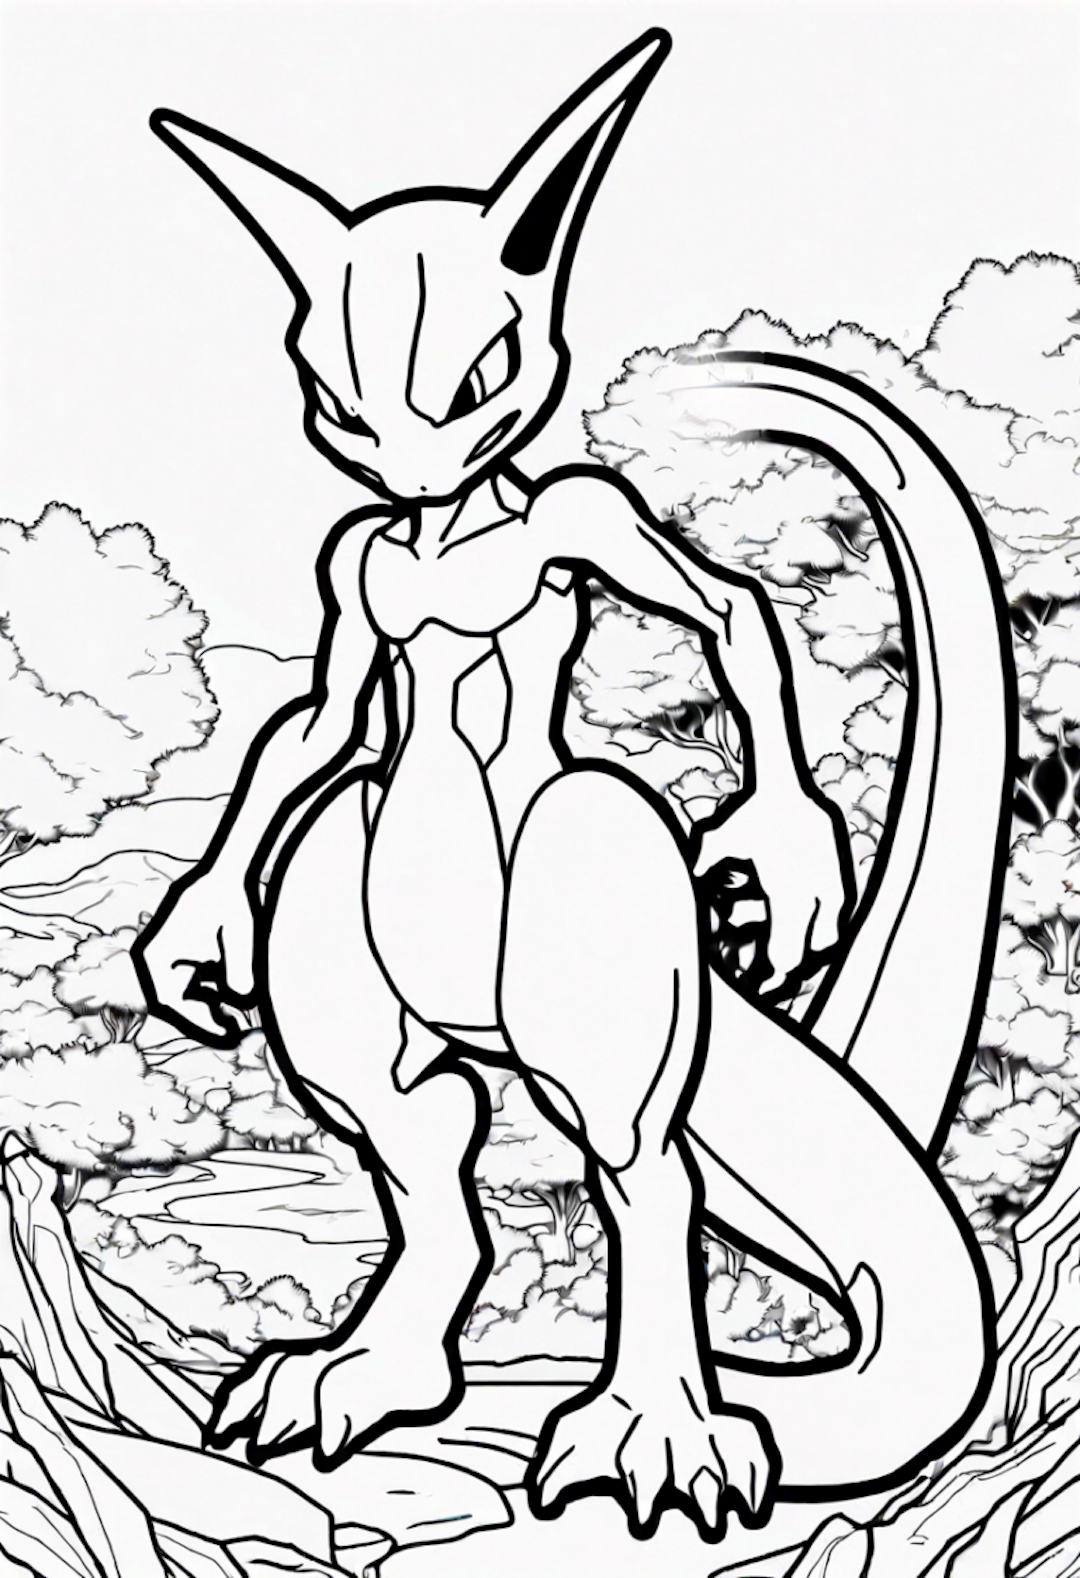 Mewtwo in the Forest Coloring Page coloring pages